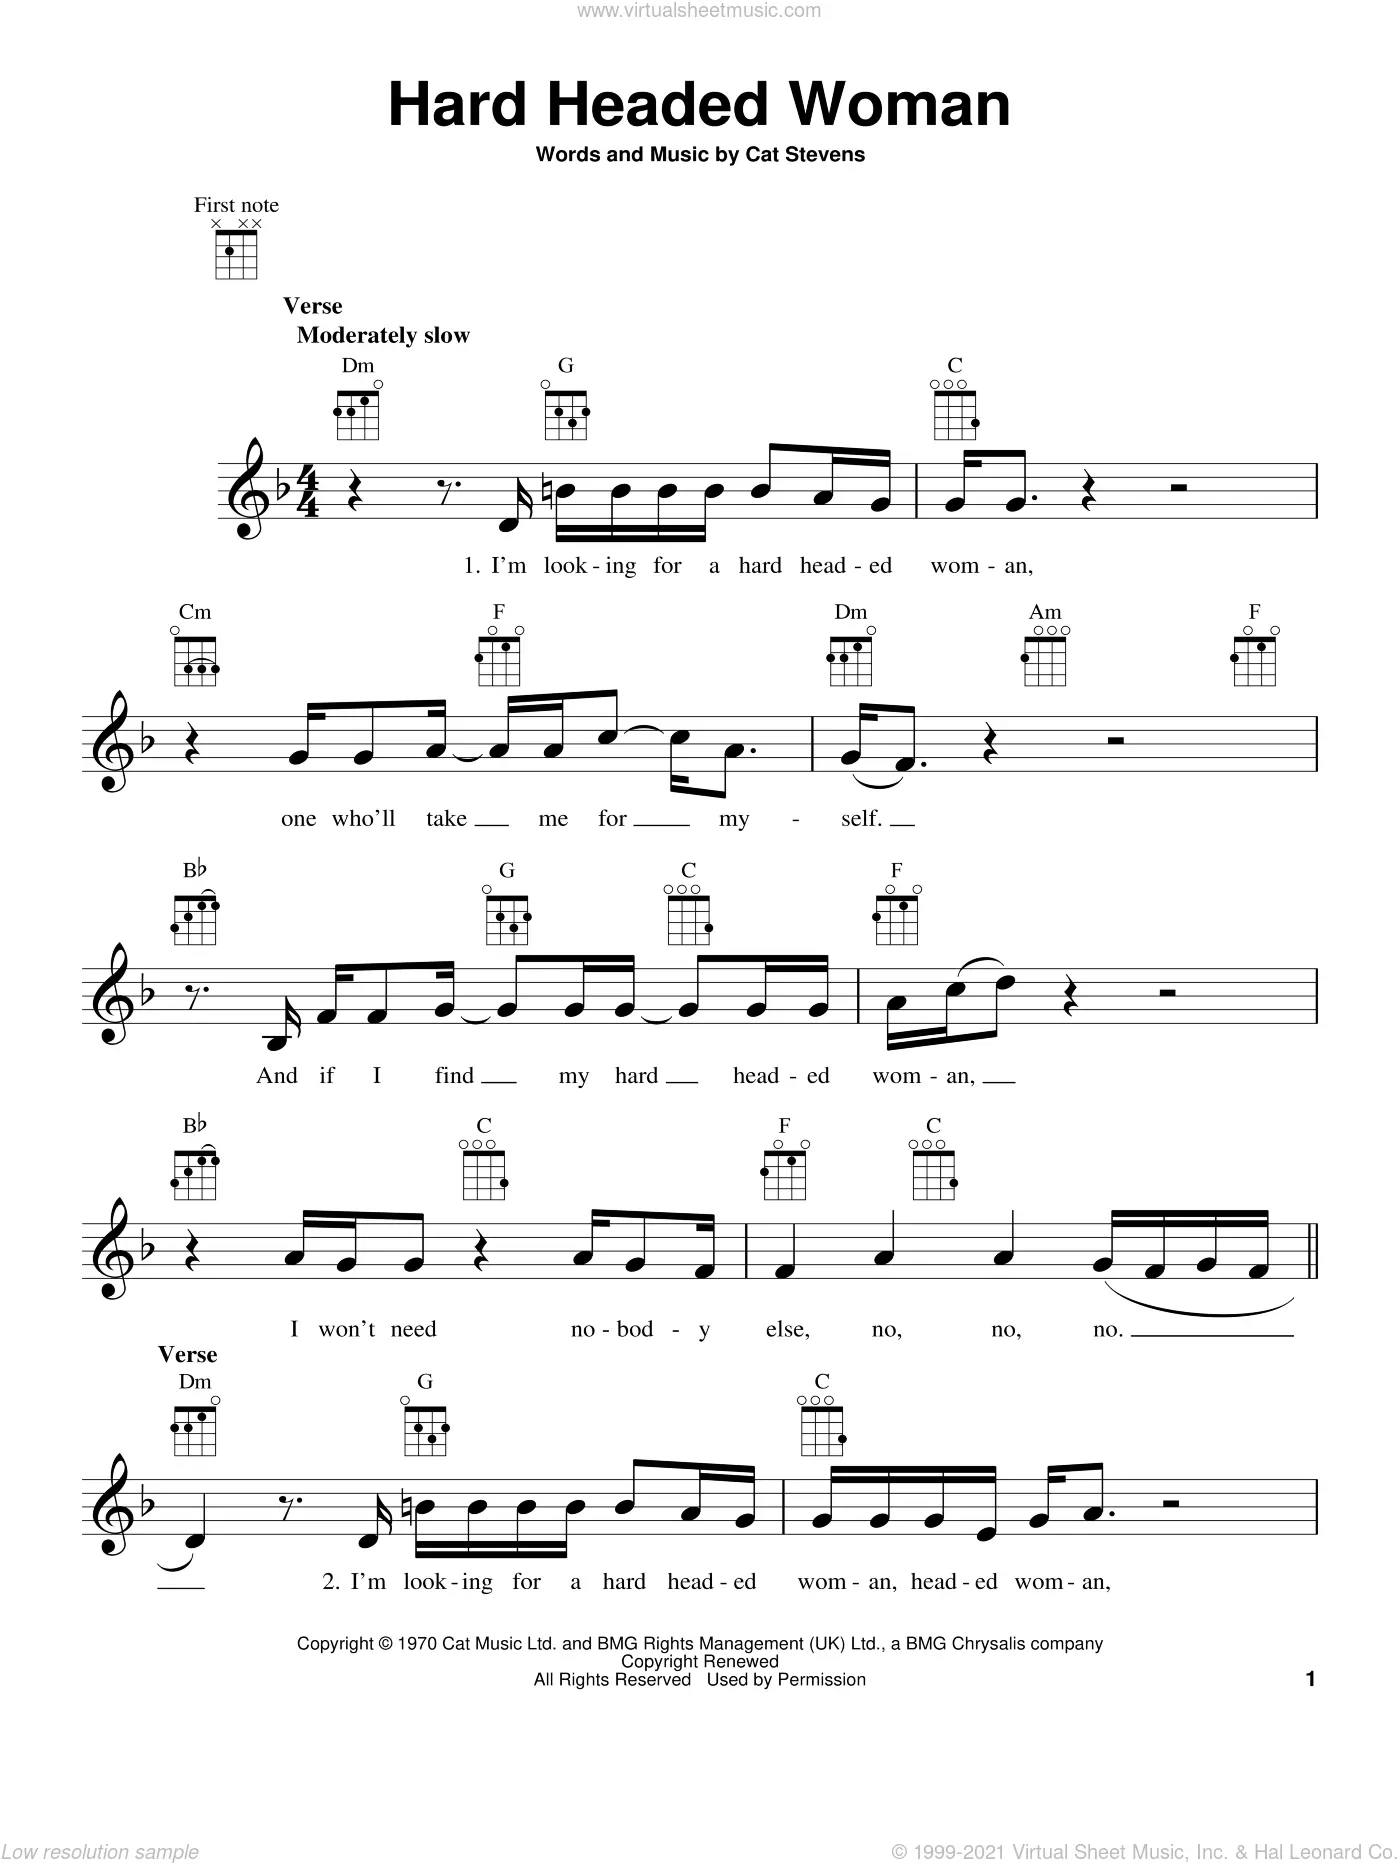 Cat Stevens Sheet Music To Download And Print